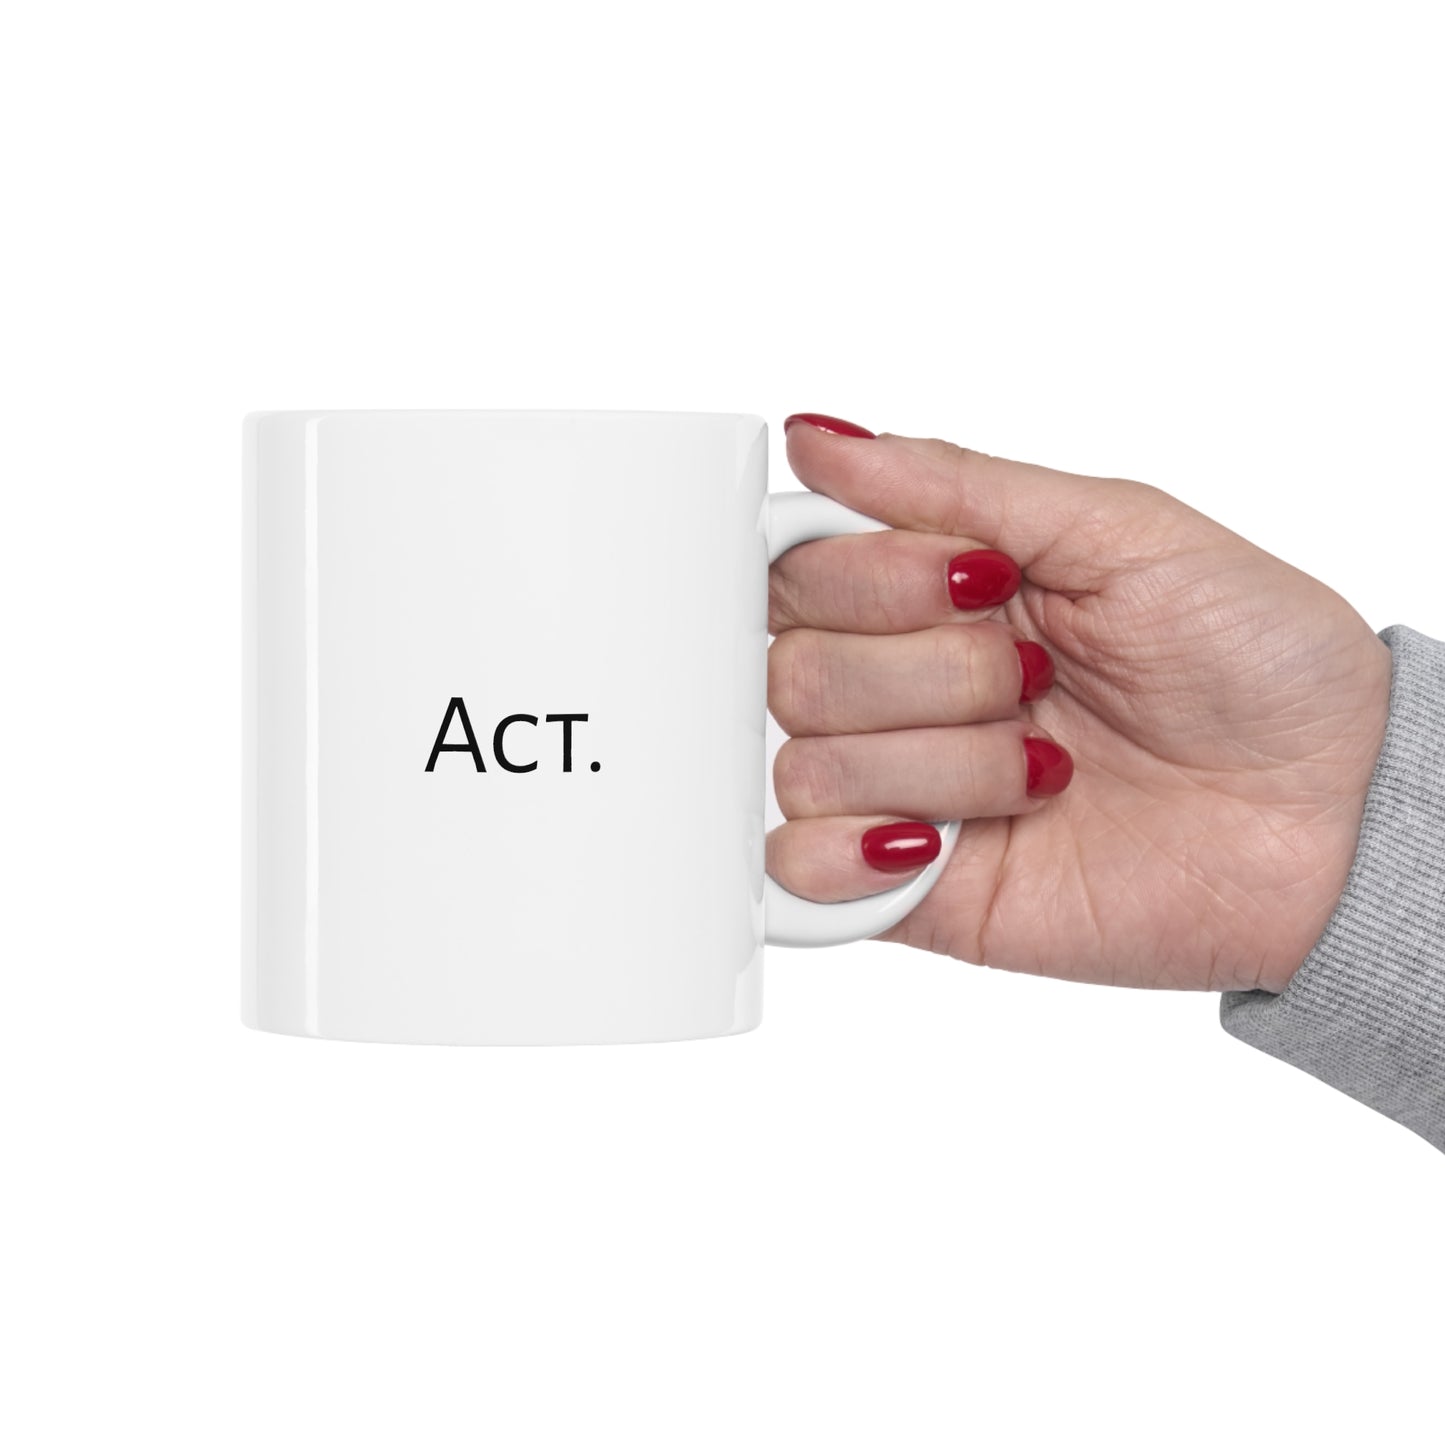 "Small acts transform the world." on one side and "Act." on another. Motivational Mug perfect for someone making a difference in the world one day at a time, one act of kindness at a time.